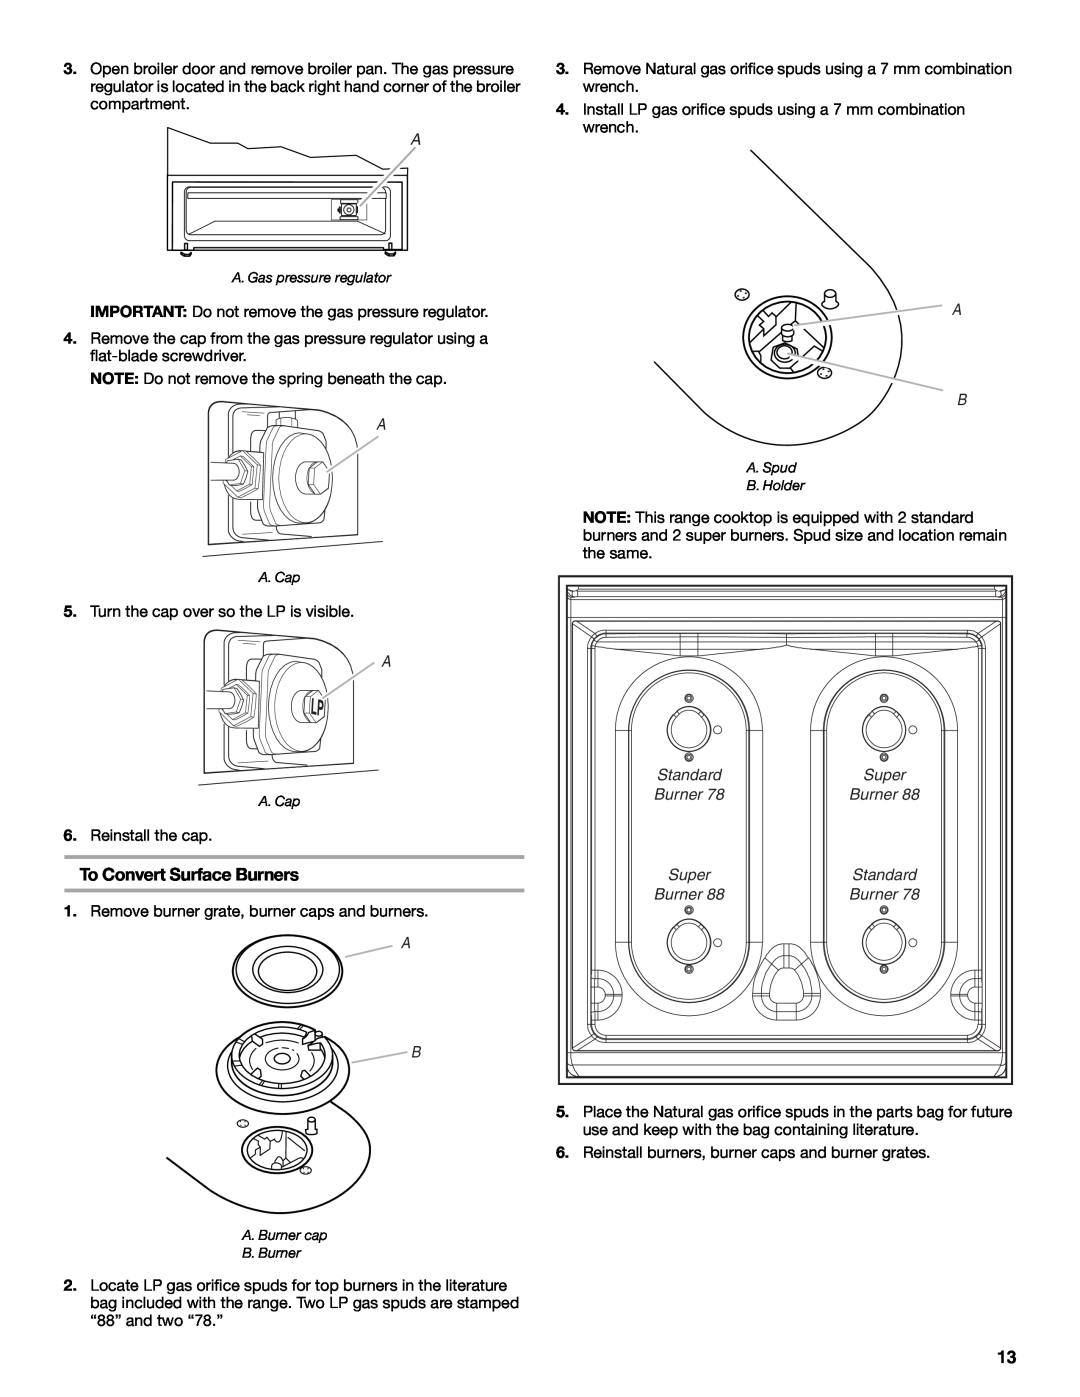 Whirlpool W10459123B installation instructions To Convert Surface Burners 